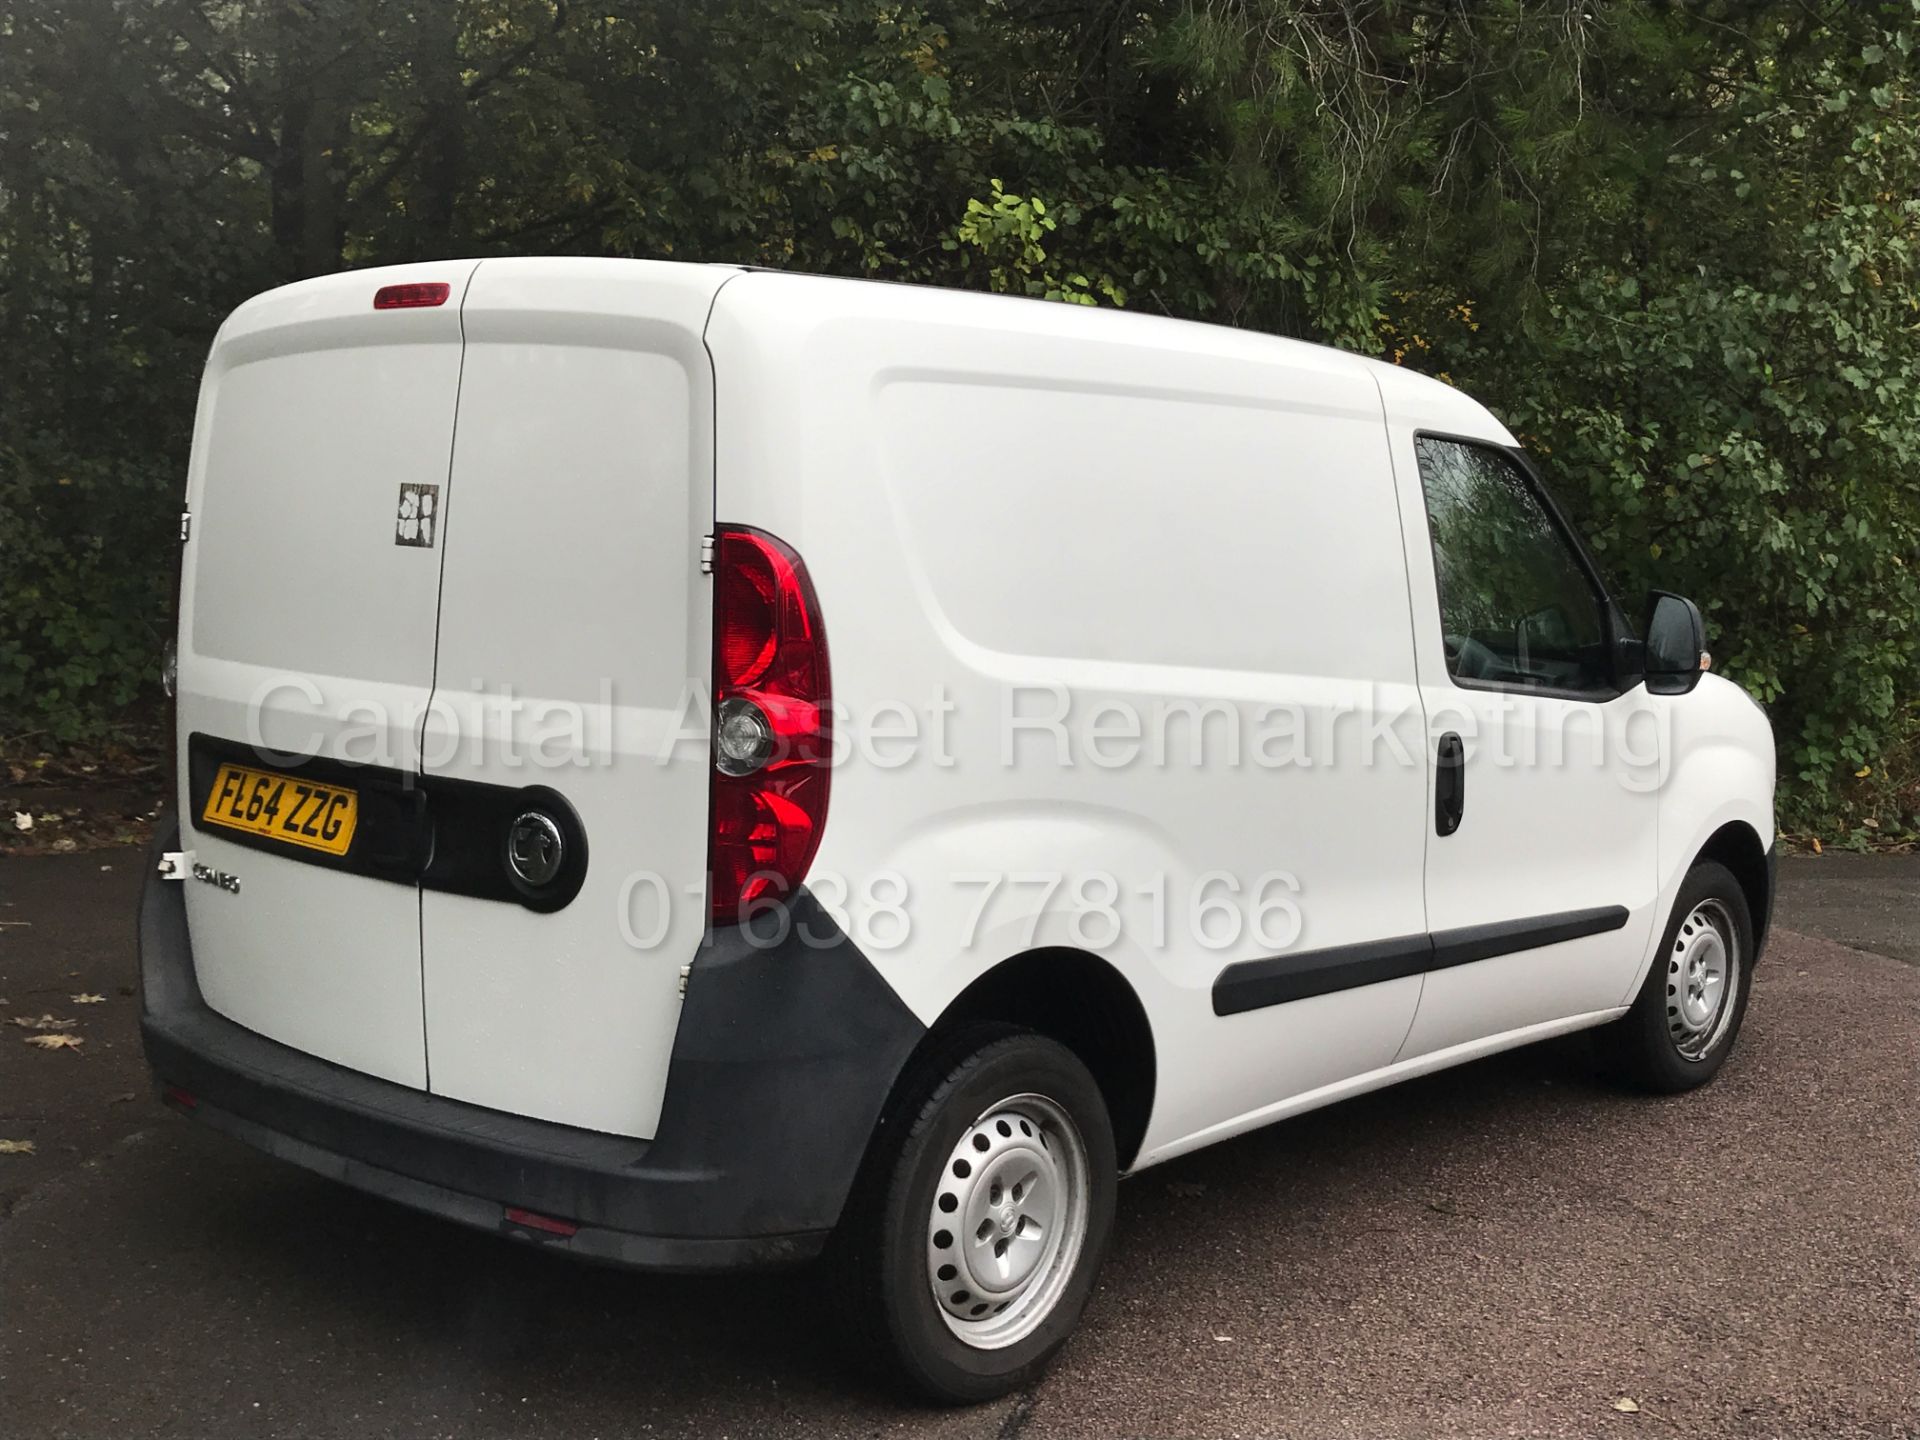 VAUXHALL COMBO 2000 L1H1 (2015 MODEL) 'CDTI - 90 BHP' (1 FORMER COMPANY OWNER FROM NEW) *50 MPG+* - Image 8 of 25